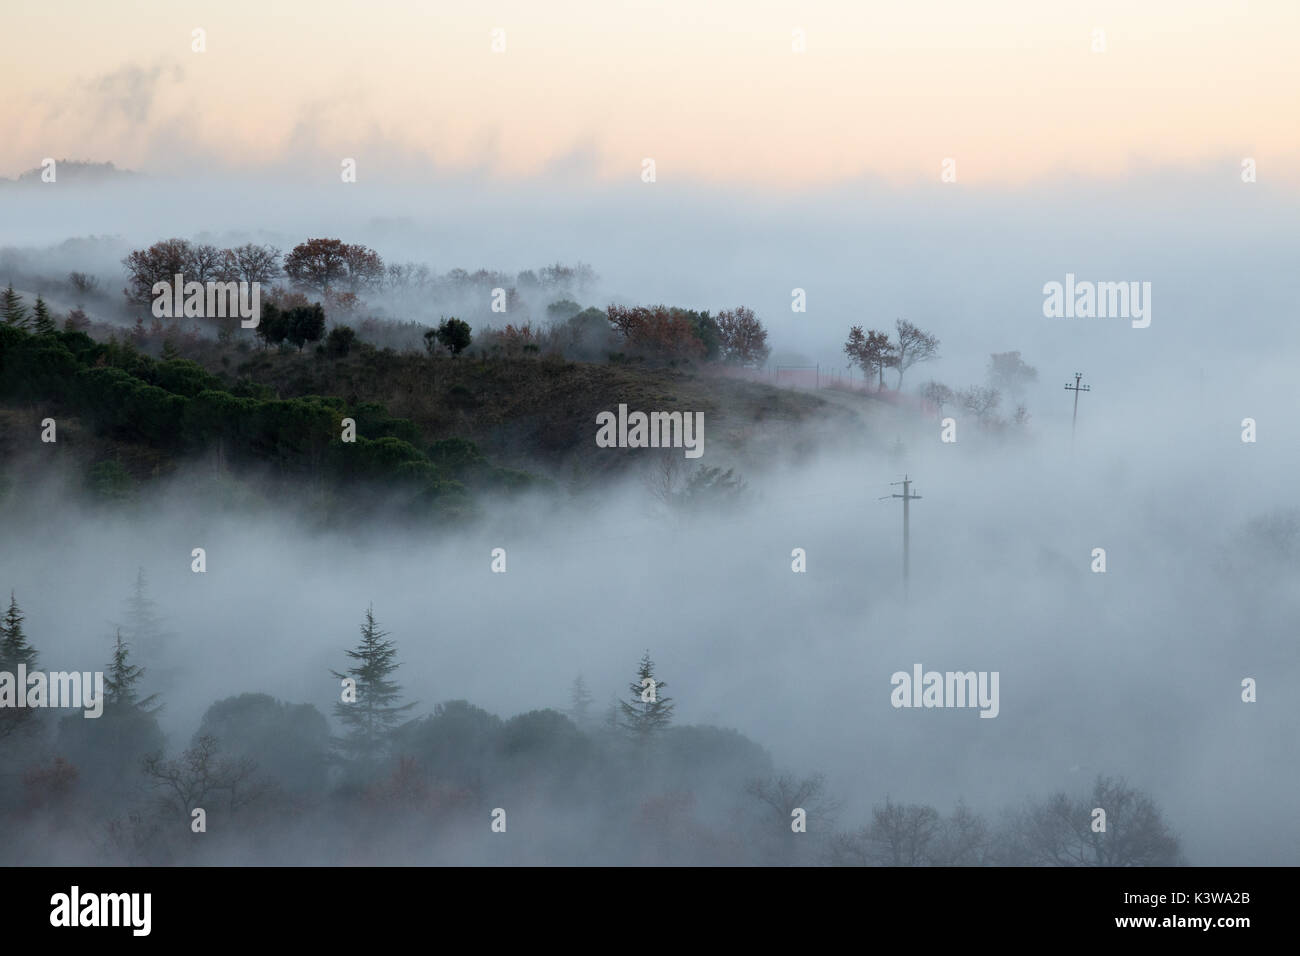 Hills and trees emerging from a sea of fog with warm sunset colors Stock Photo